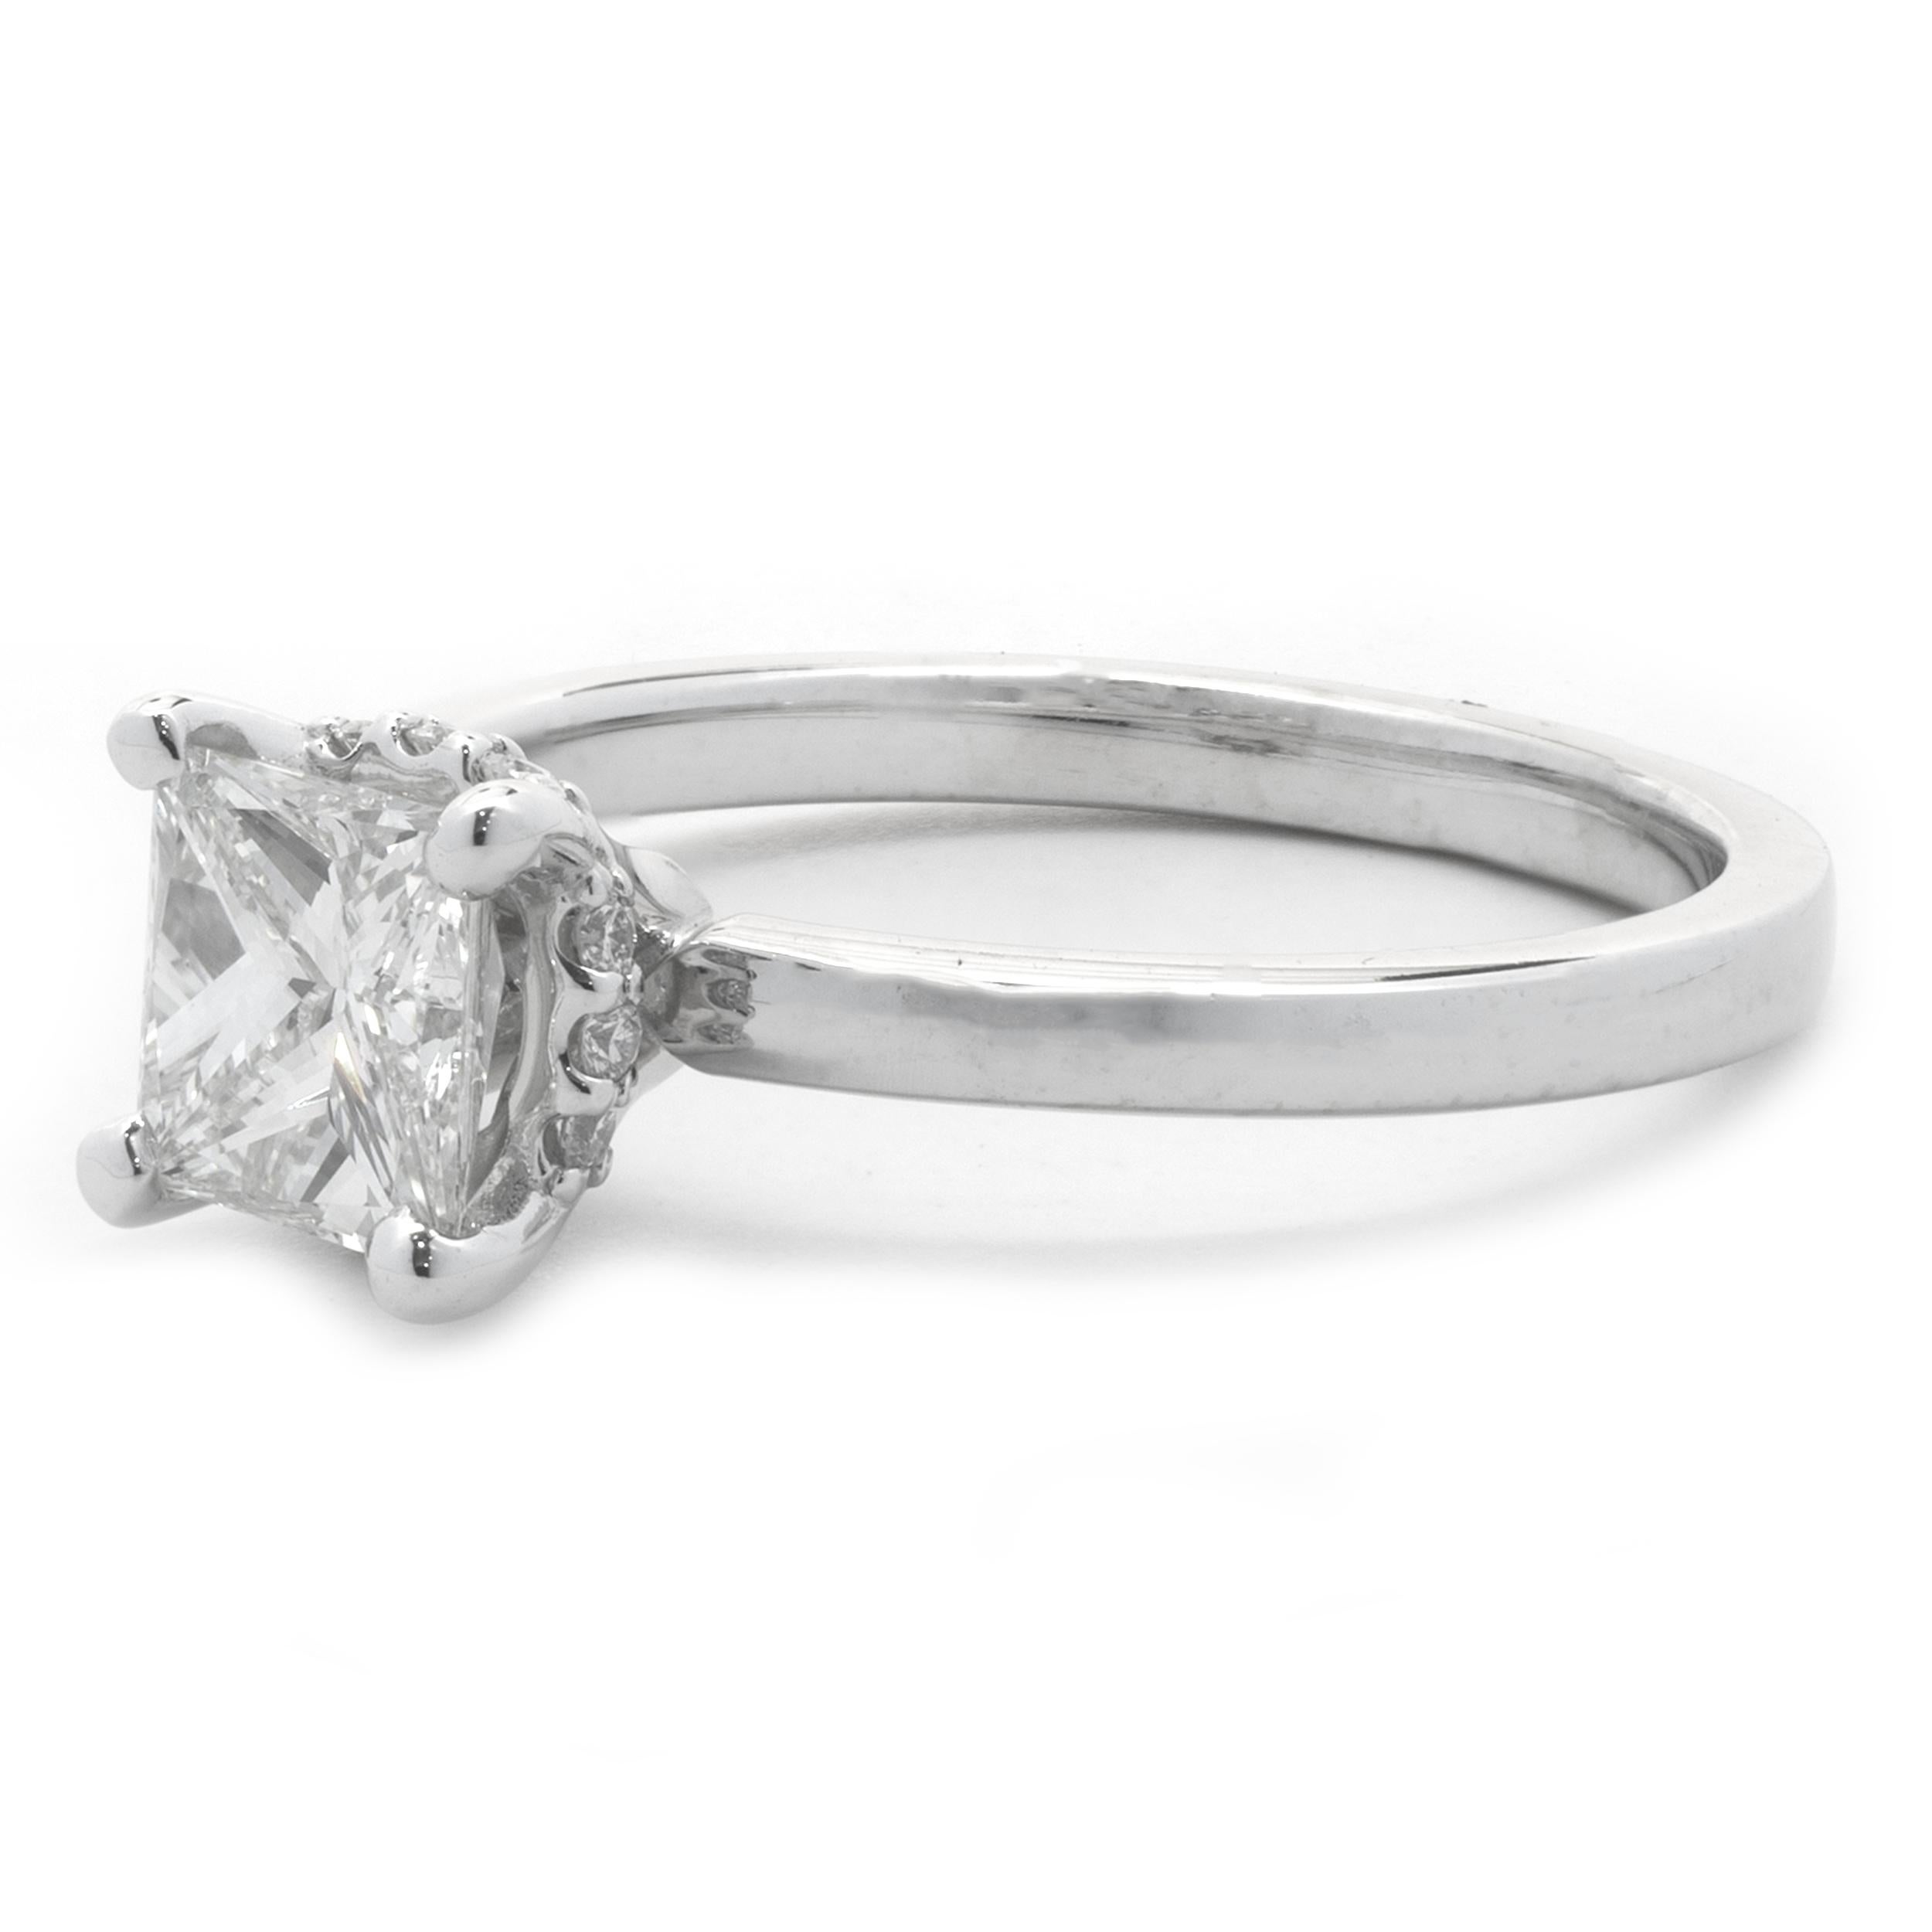 14 Karat White Gold 0.78ct Princess Cut Diamond Engagement Ring In Excellent Condition For Sale In Scottsdale, AZ